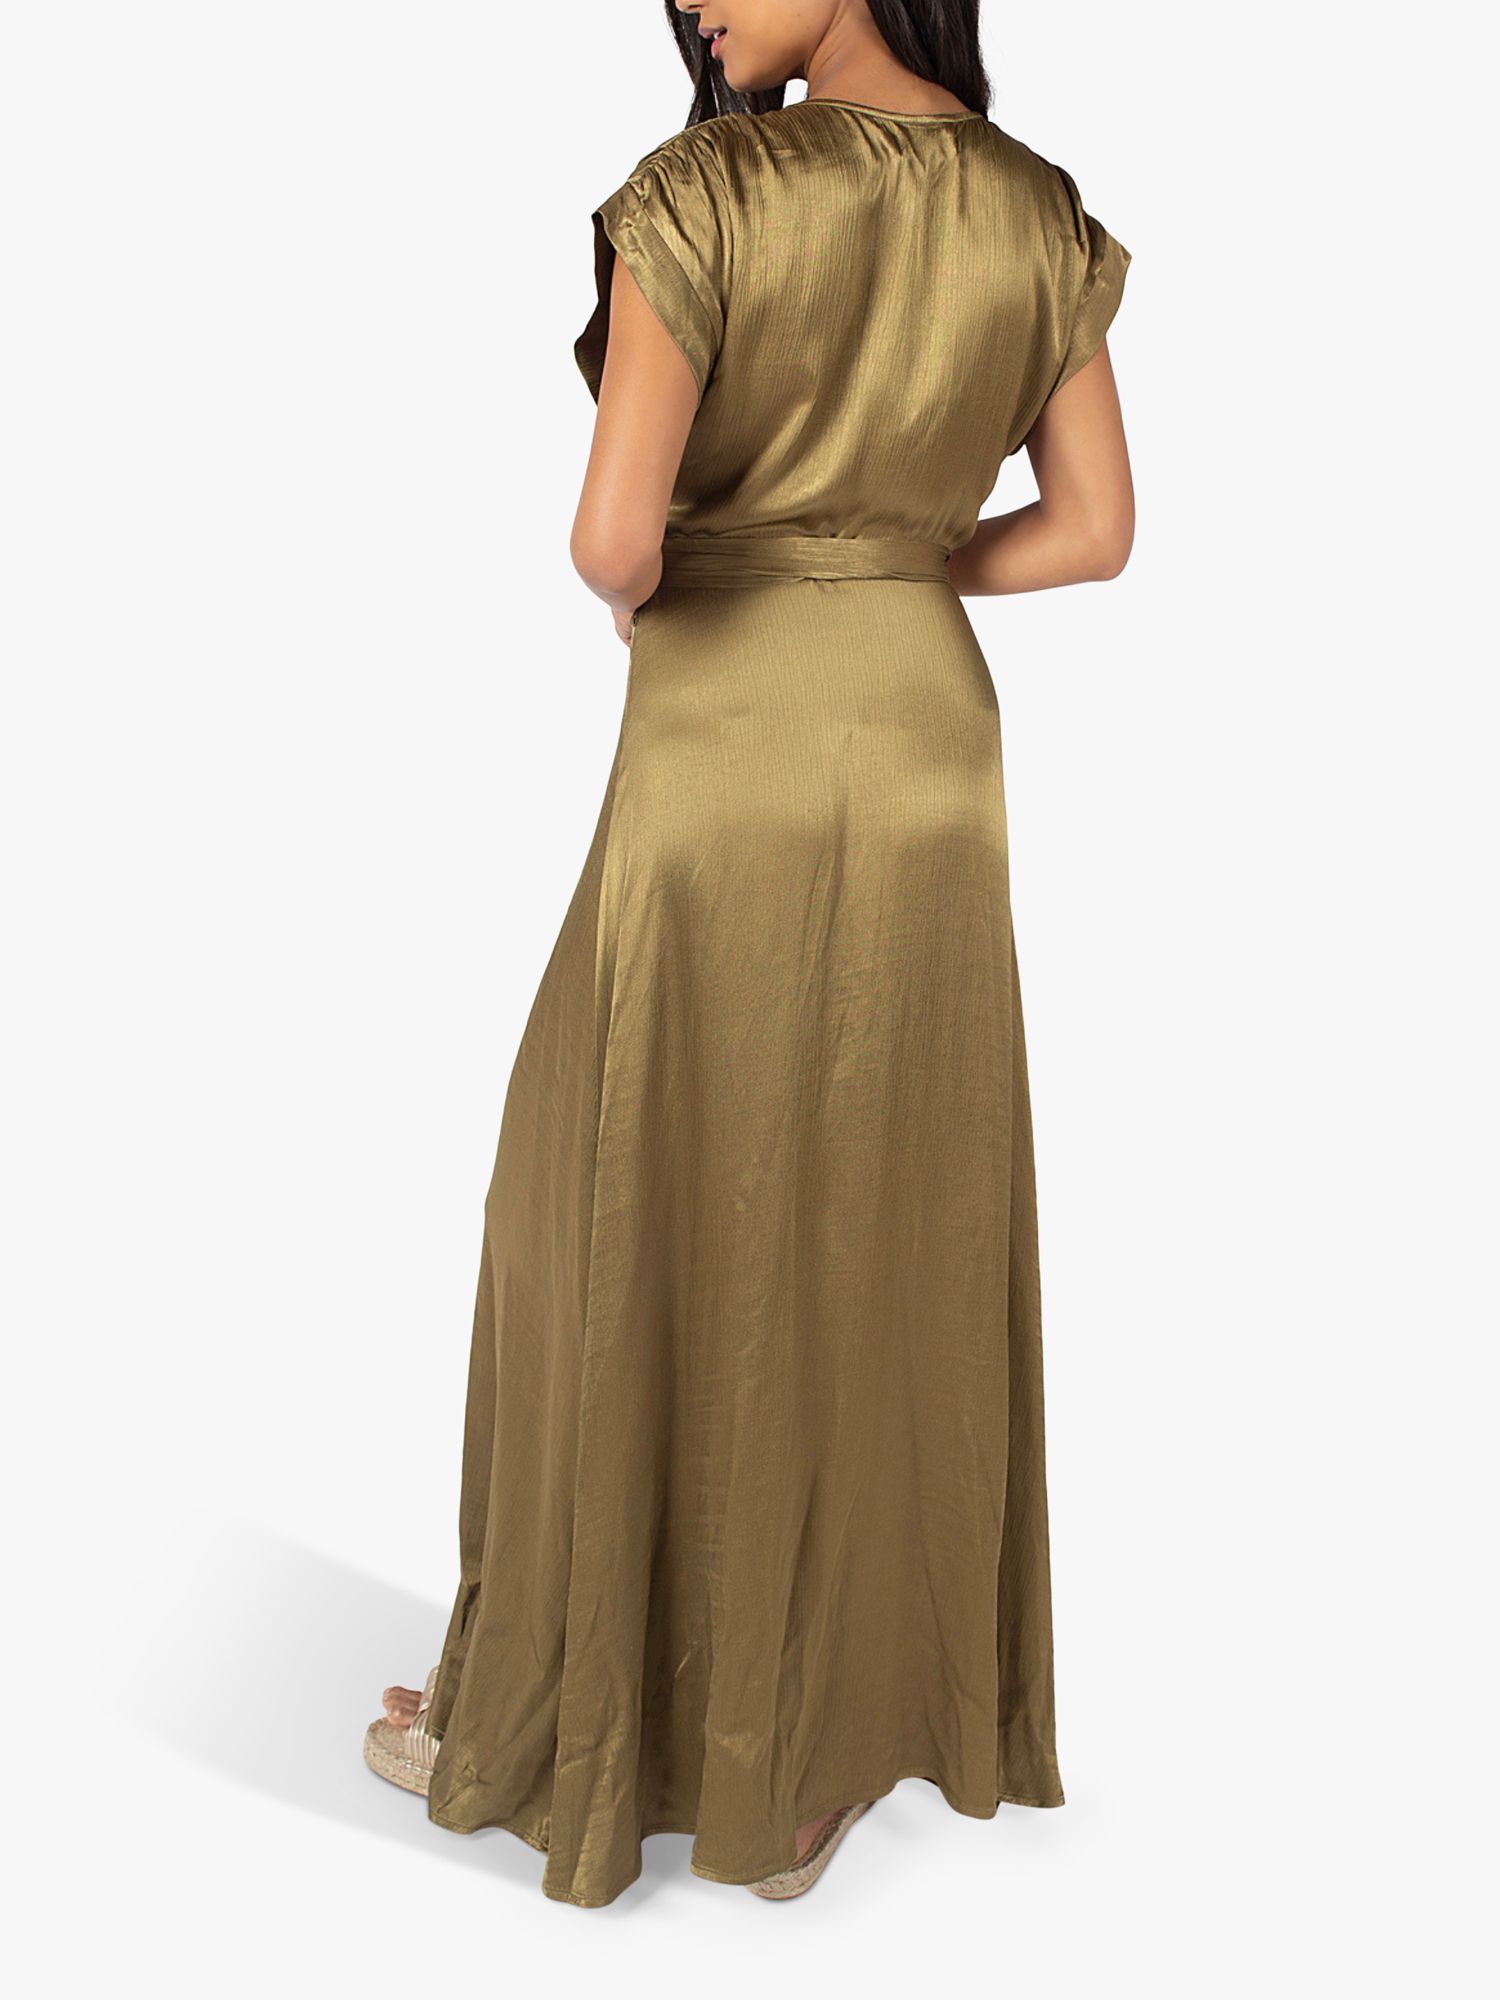 Traffic People Breathless Claude Wrap Maxi Dress, Olive, XS